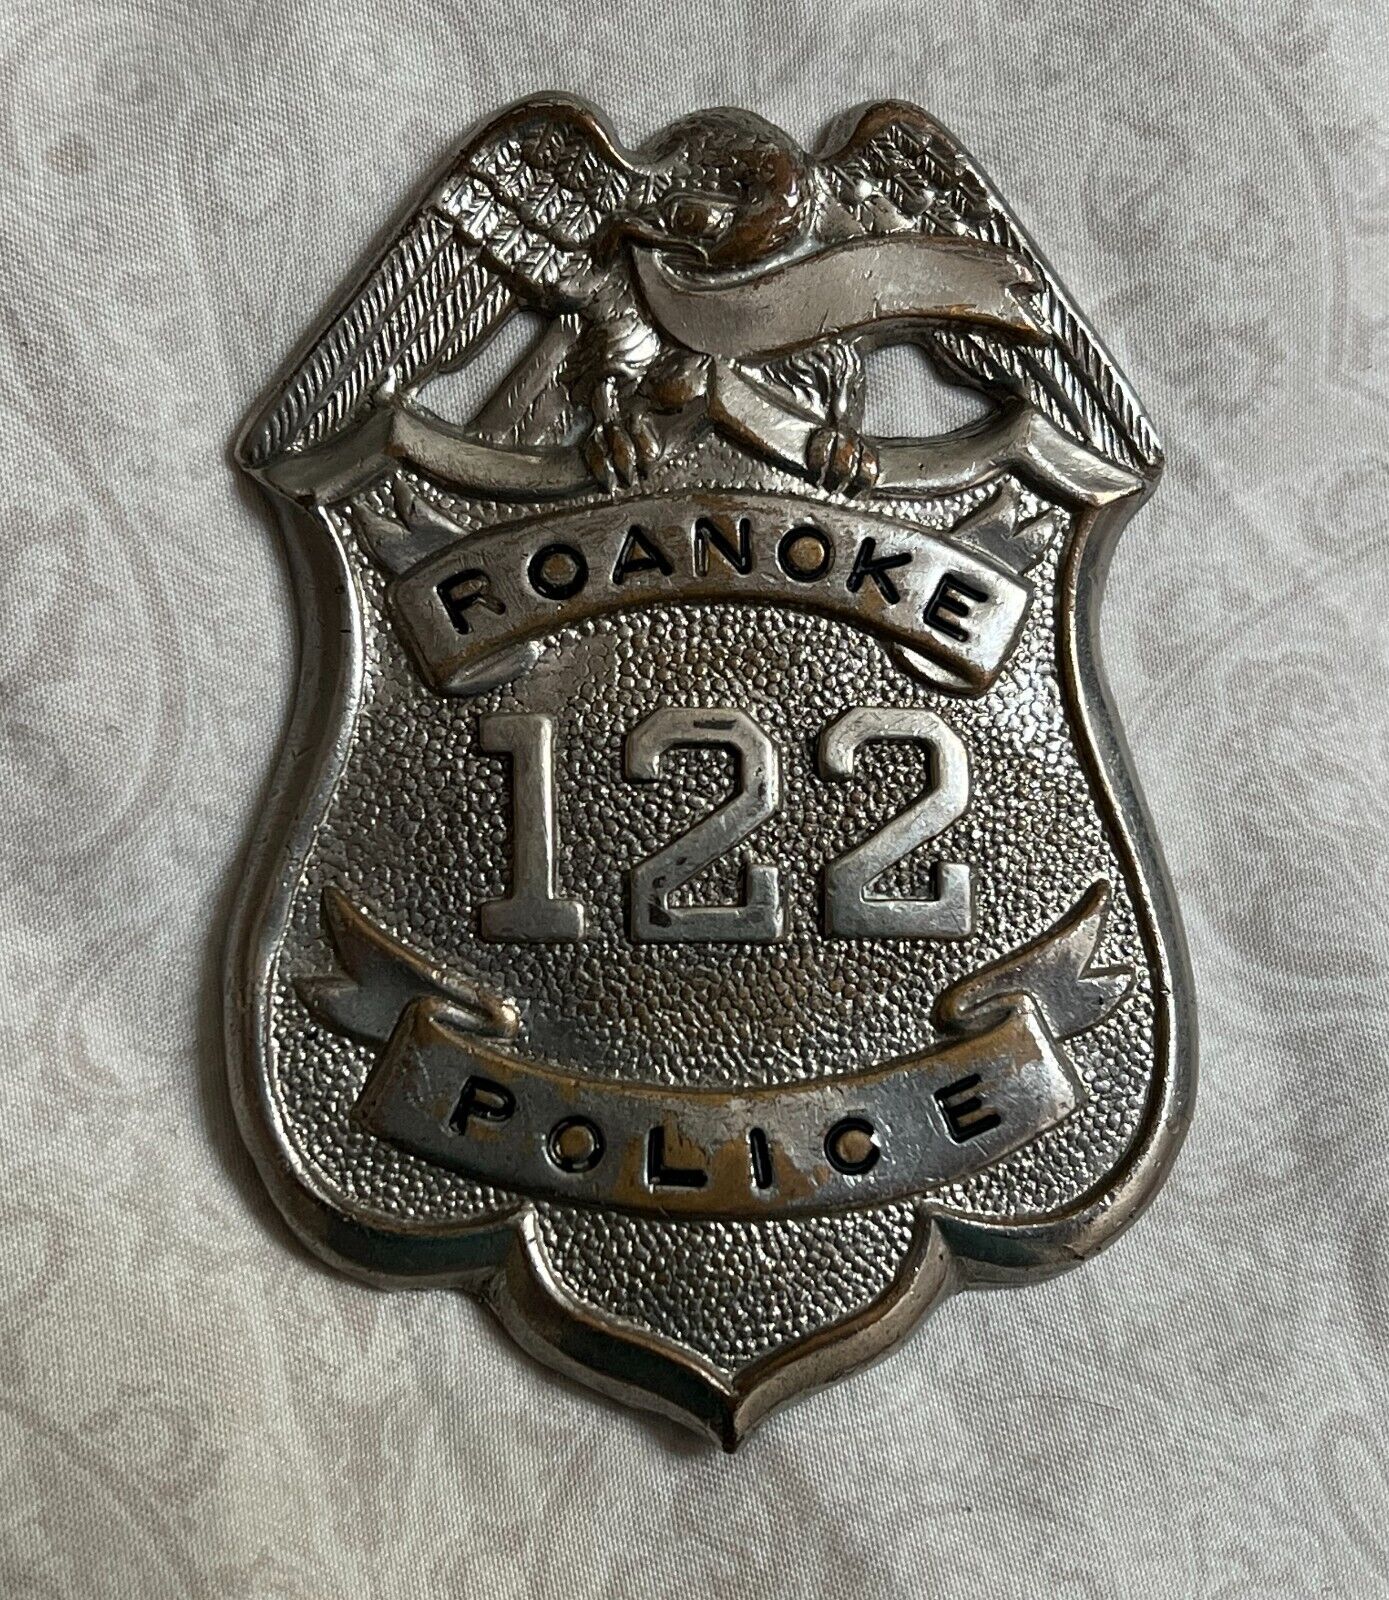 Antique ROANOKE Police Badge 122 SH REESE WARREN NY *OLD AND OBSOLETE*